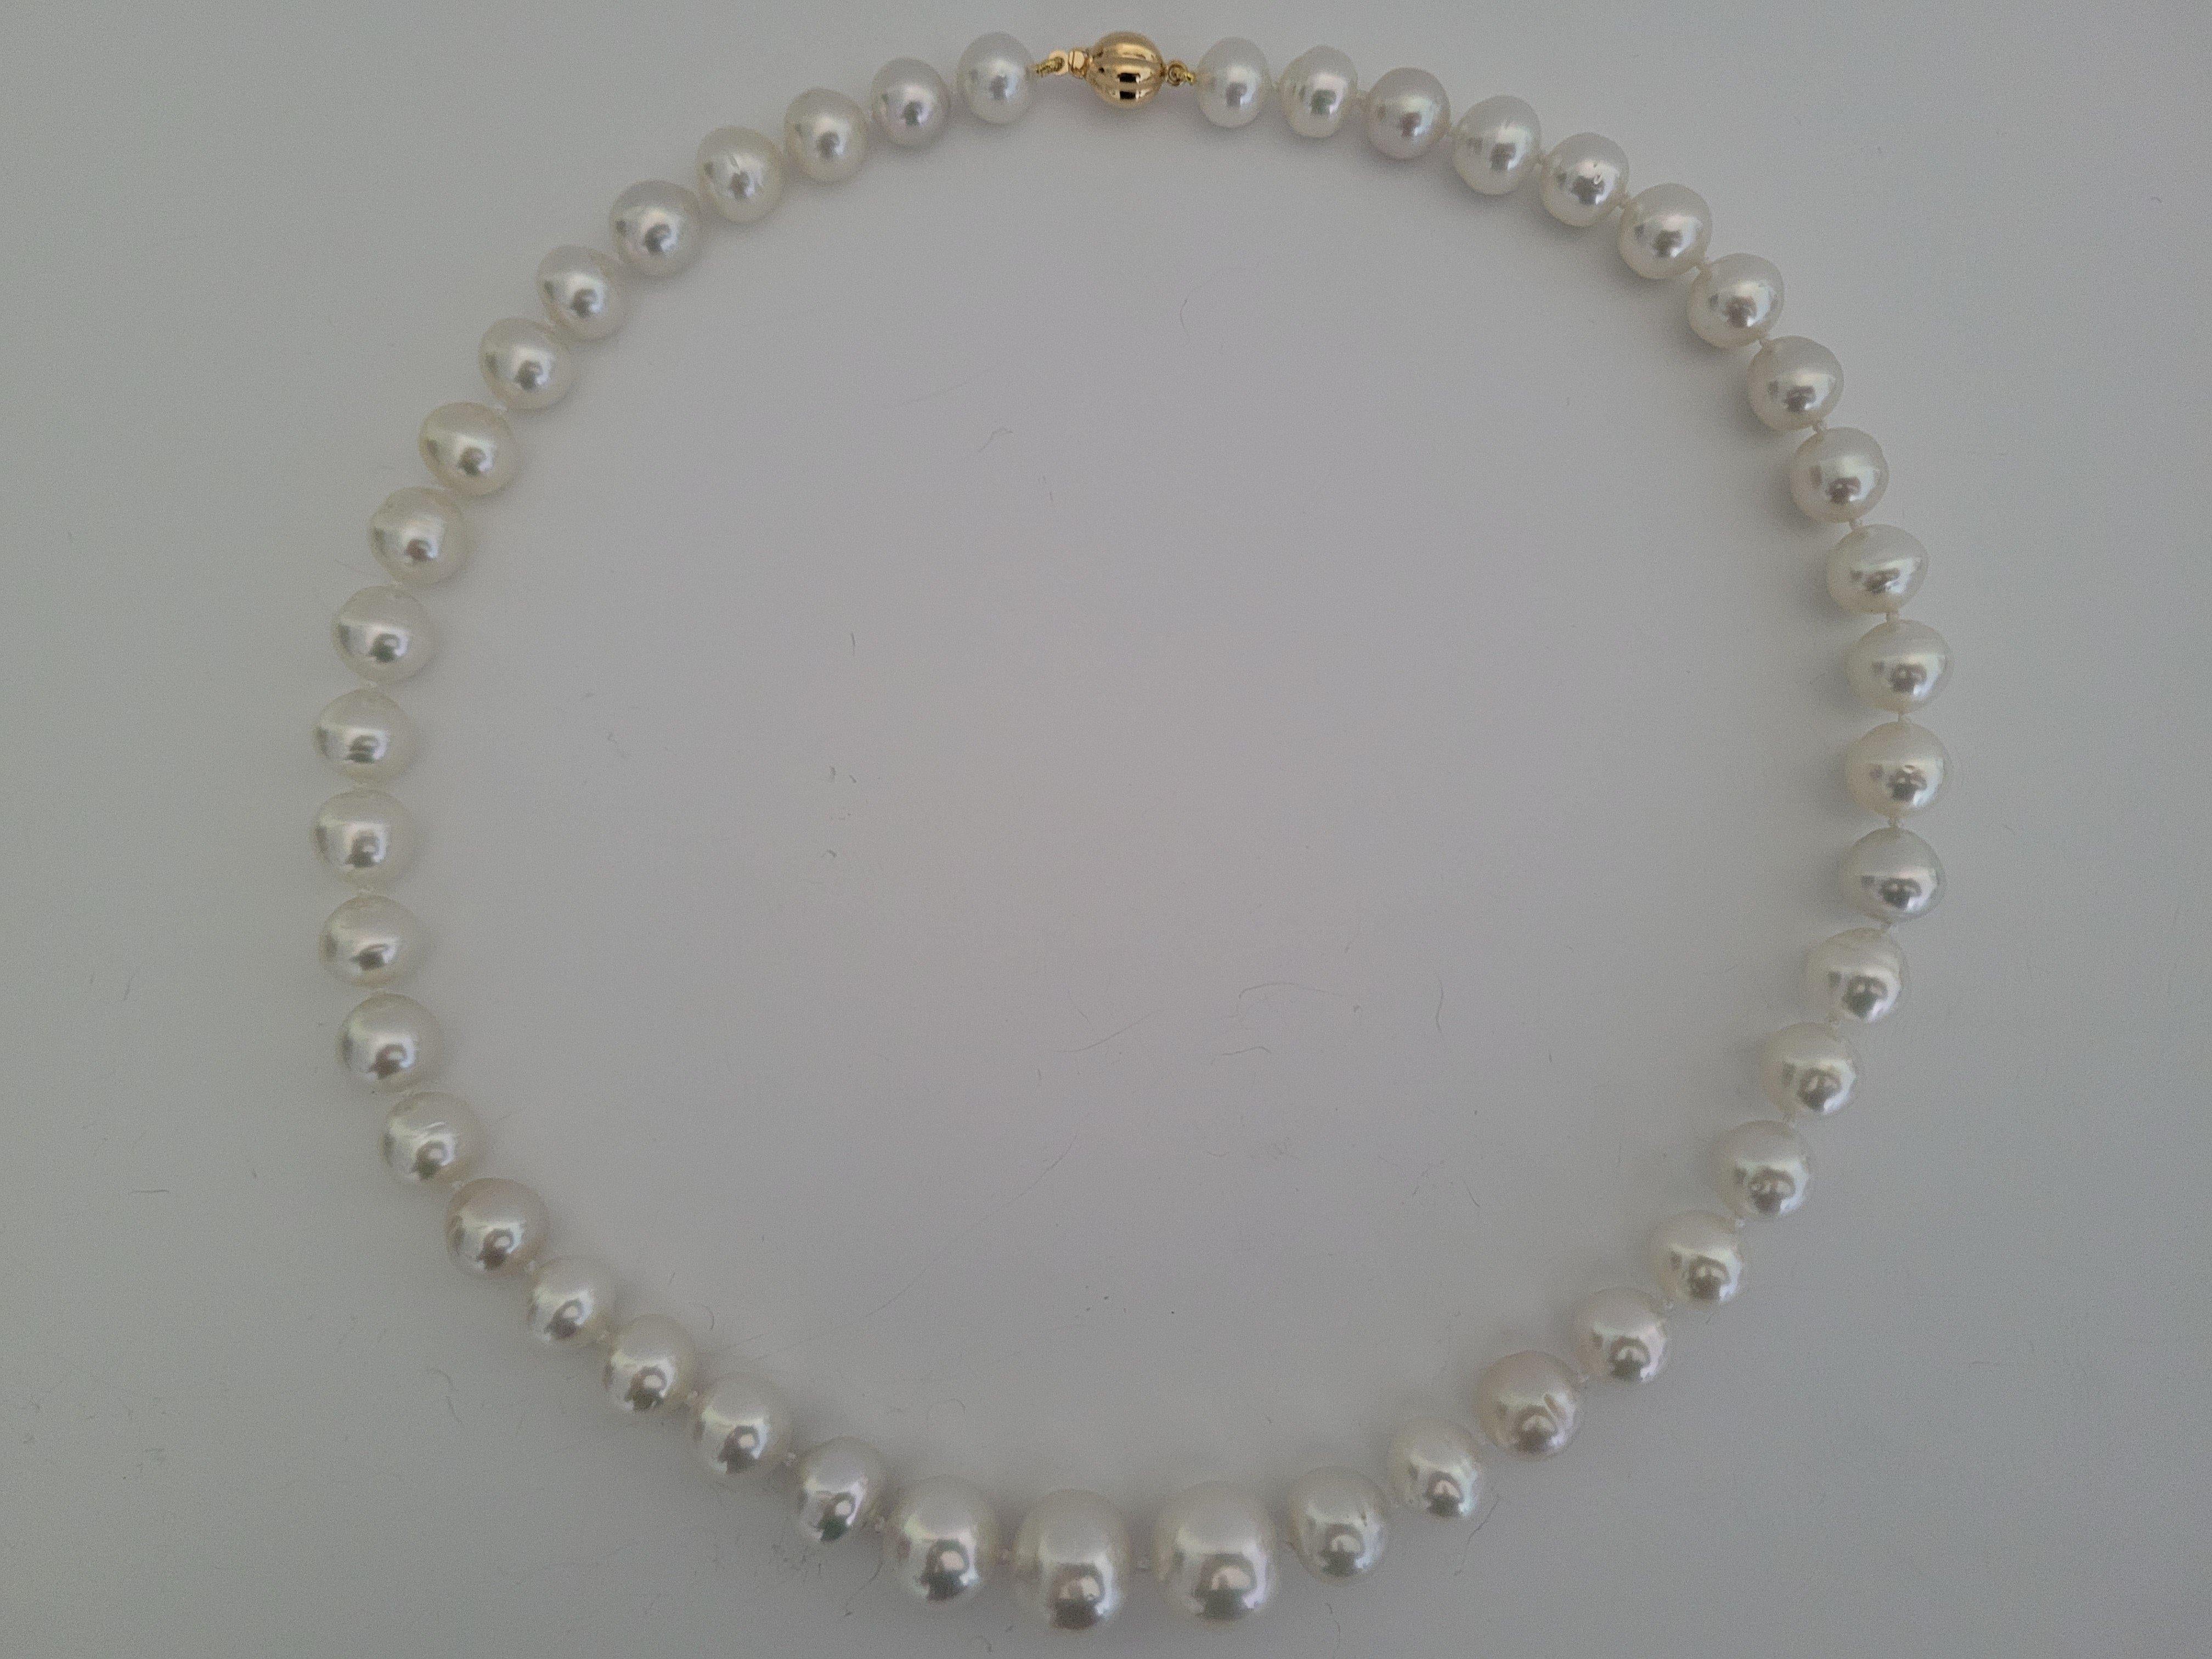 Bead South Sea Pearl White Natural Color, Very High Luster and Orient For Sale